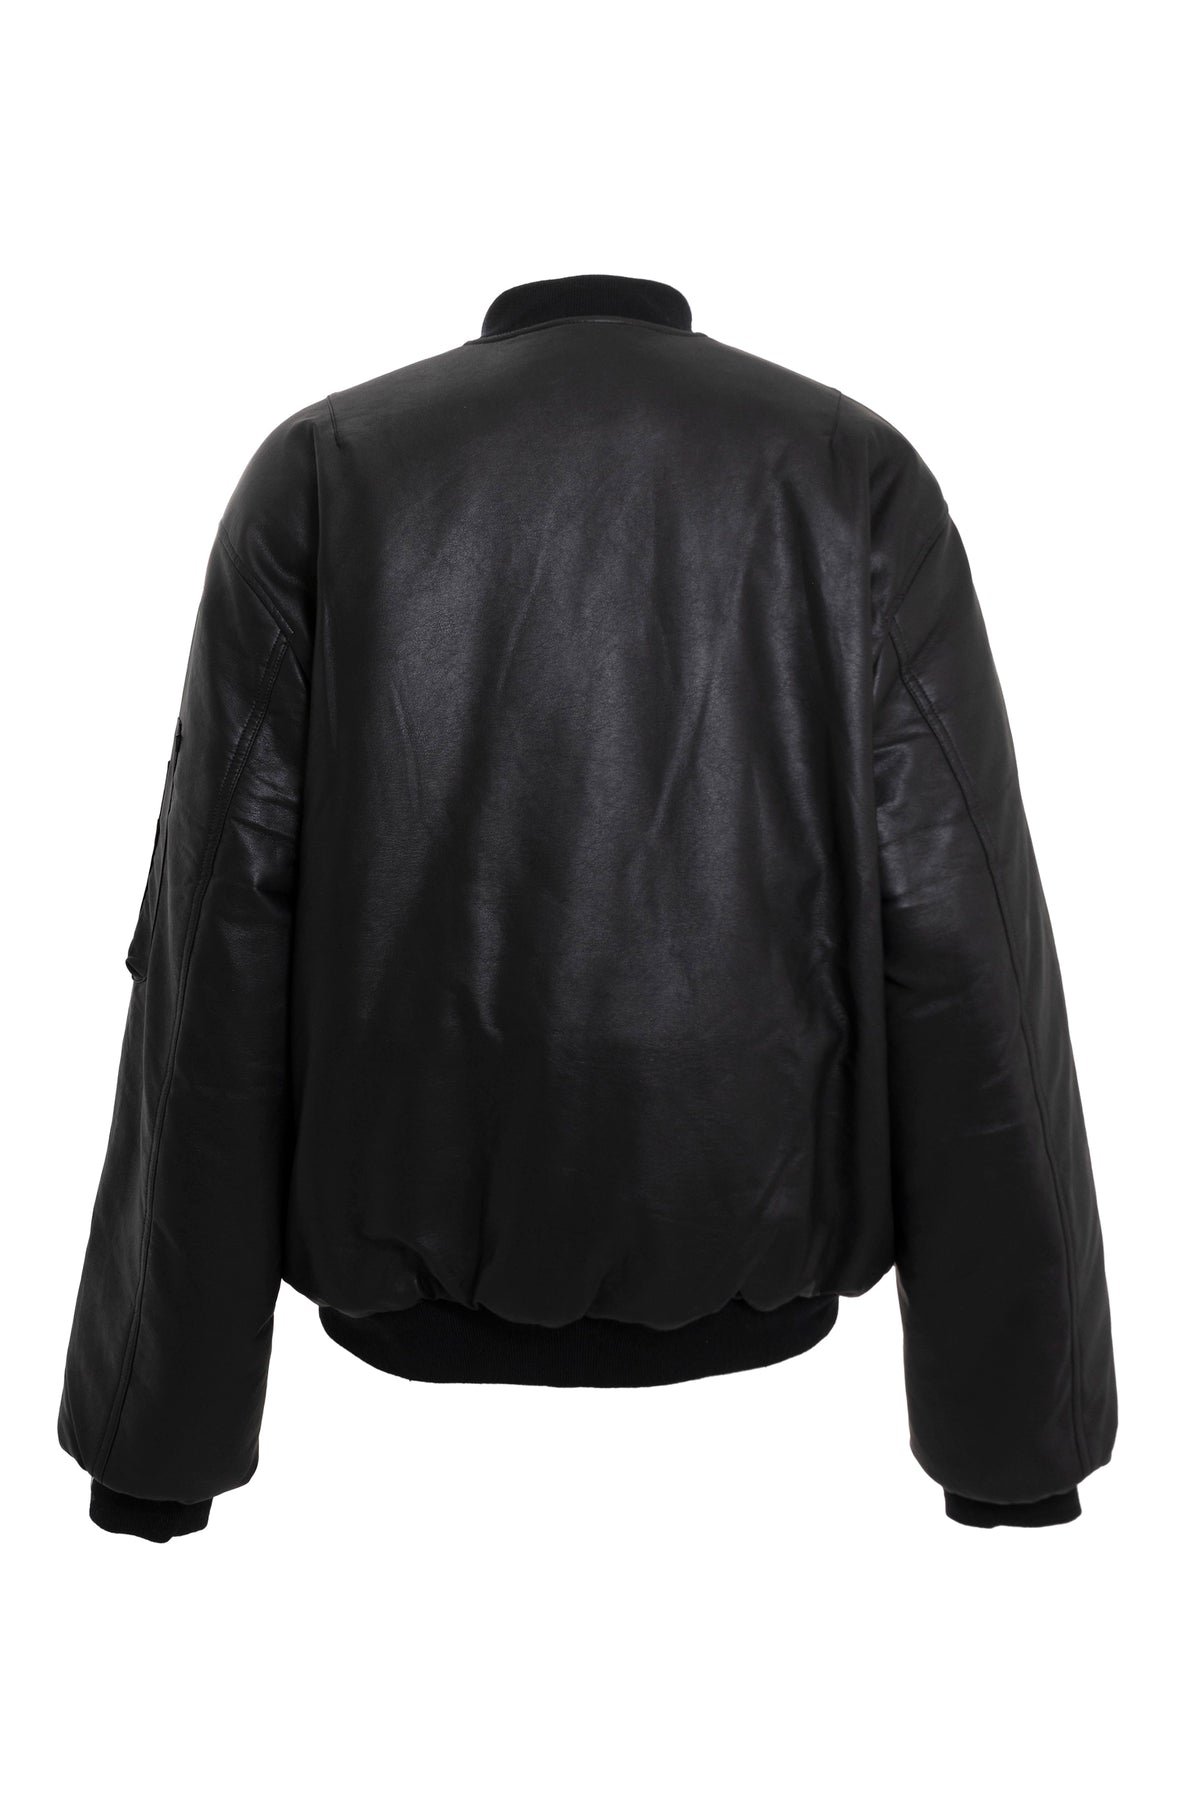 BREATH × F.M.C.D SYNTHETIC LEATHER BOMBER JACKET / BLK